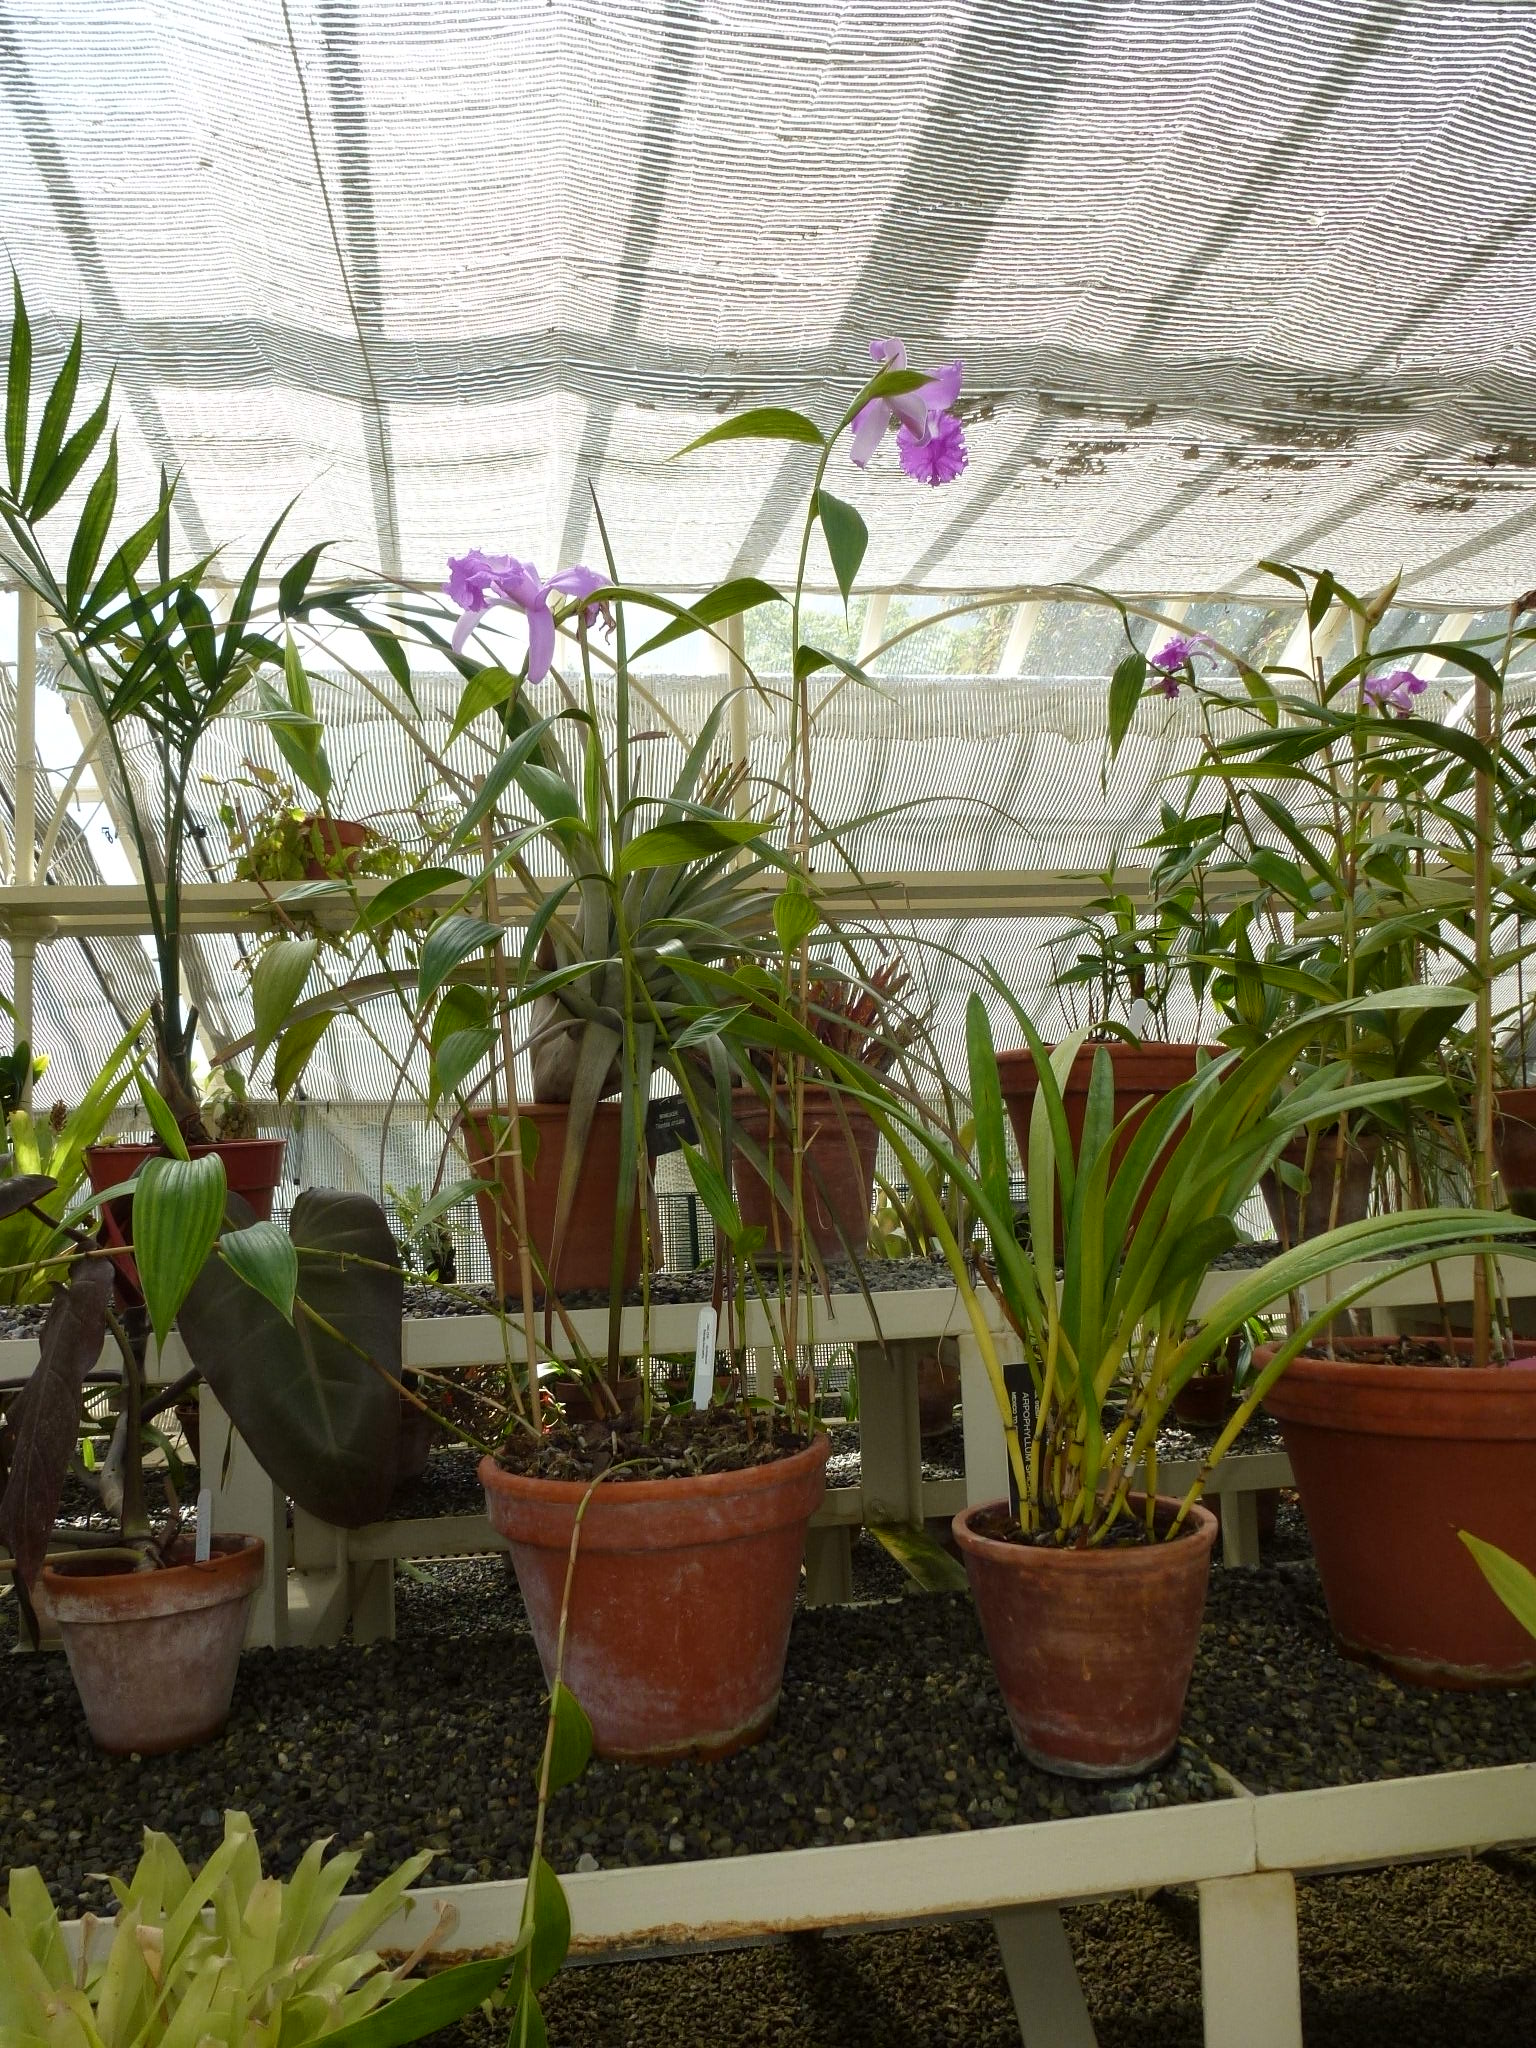 Orchids in a greenhouse at Dublin Botanical Gardens